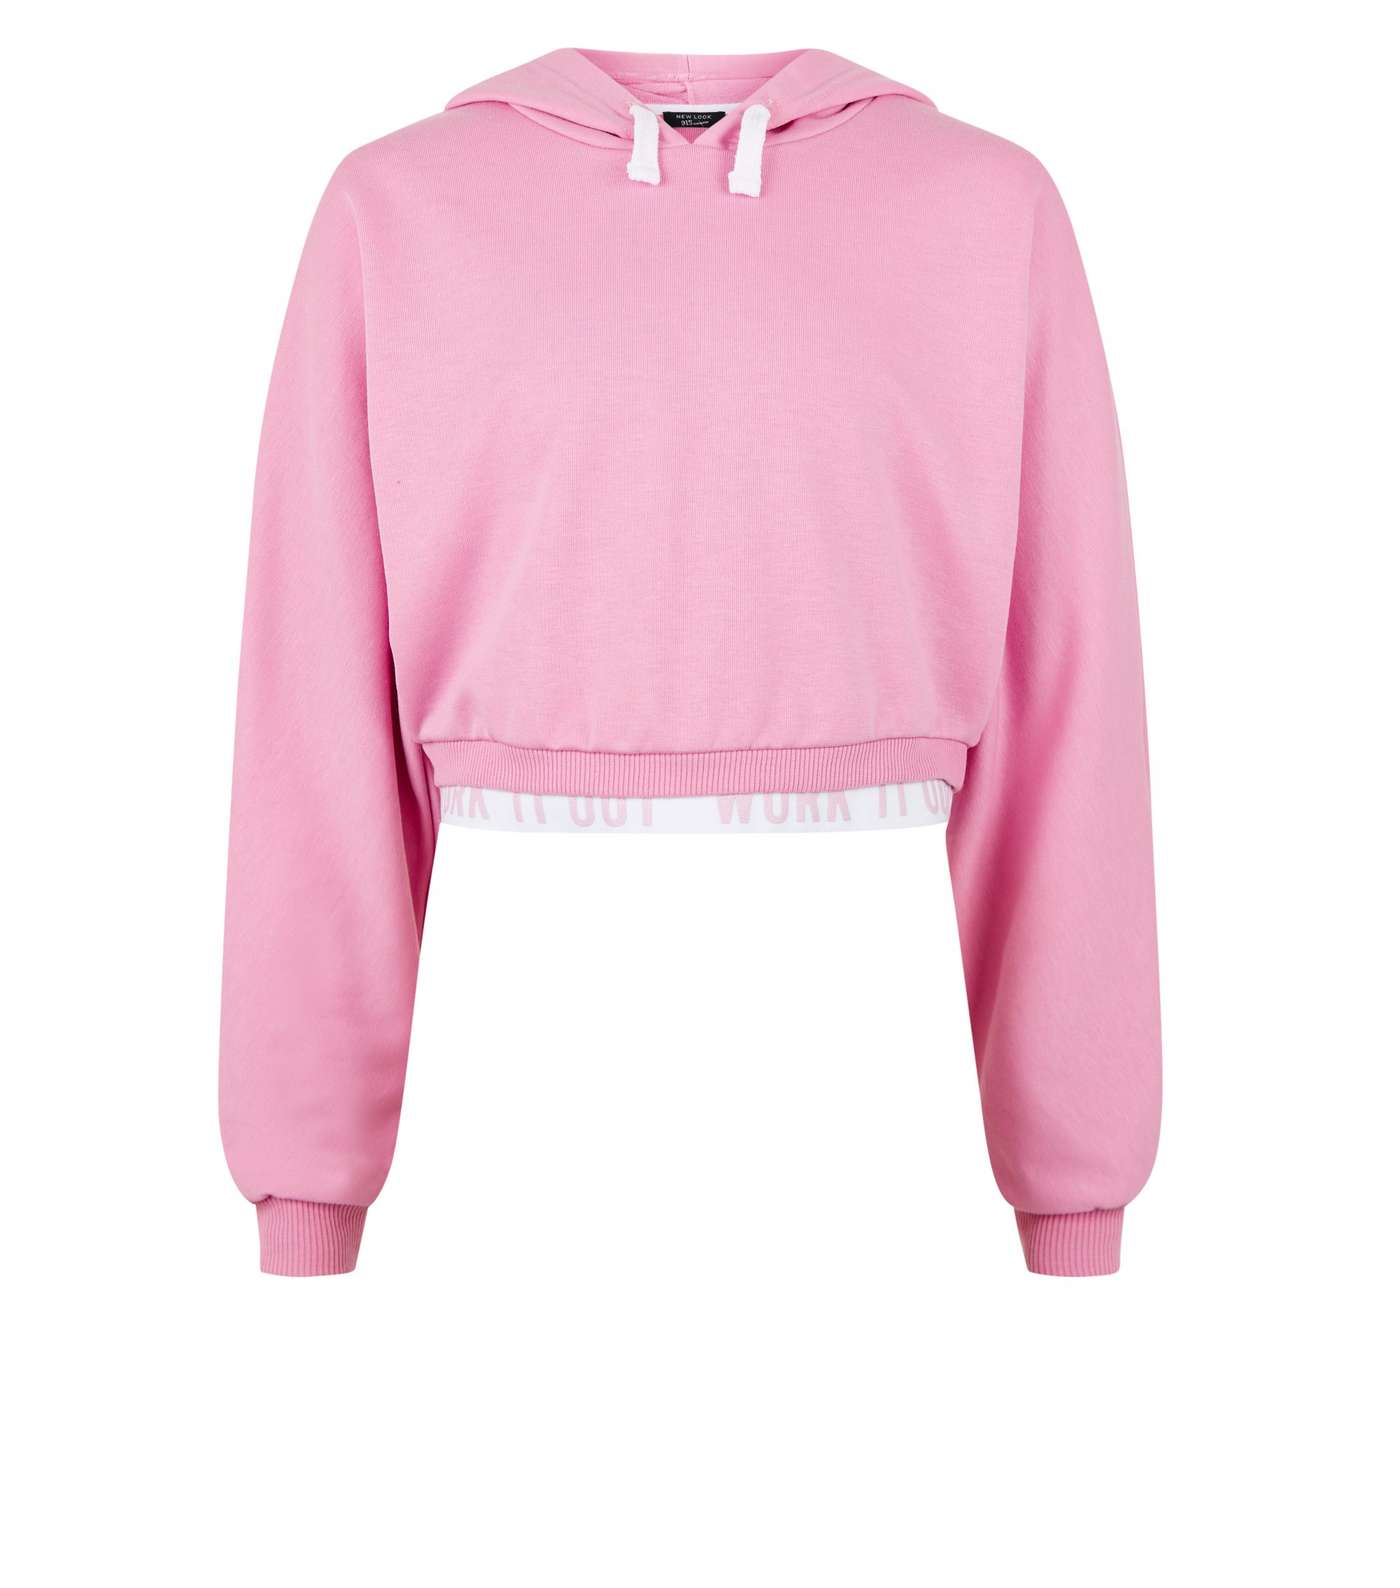 Girls Pink Work It Out Slogan Sports Hoodie Image 4